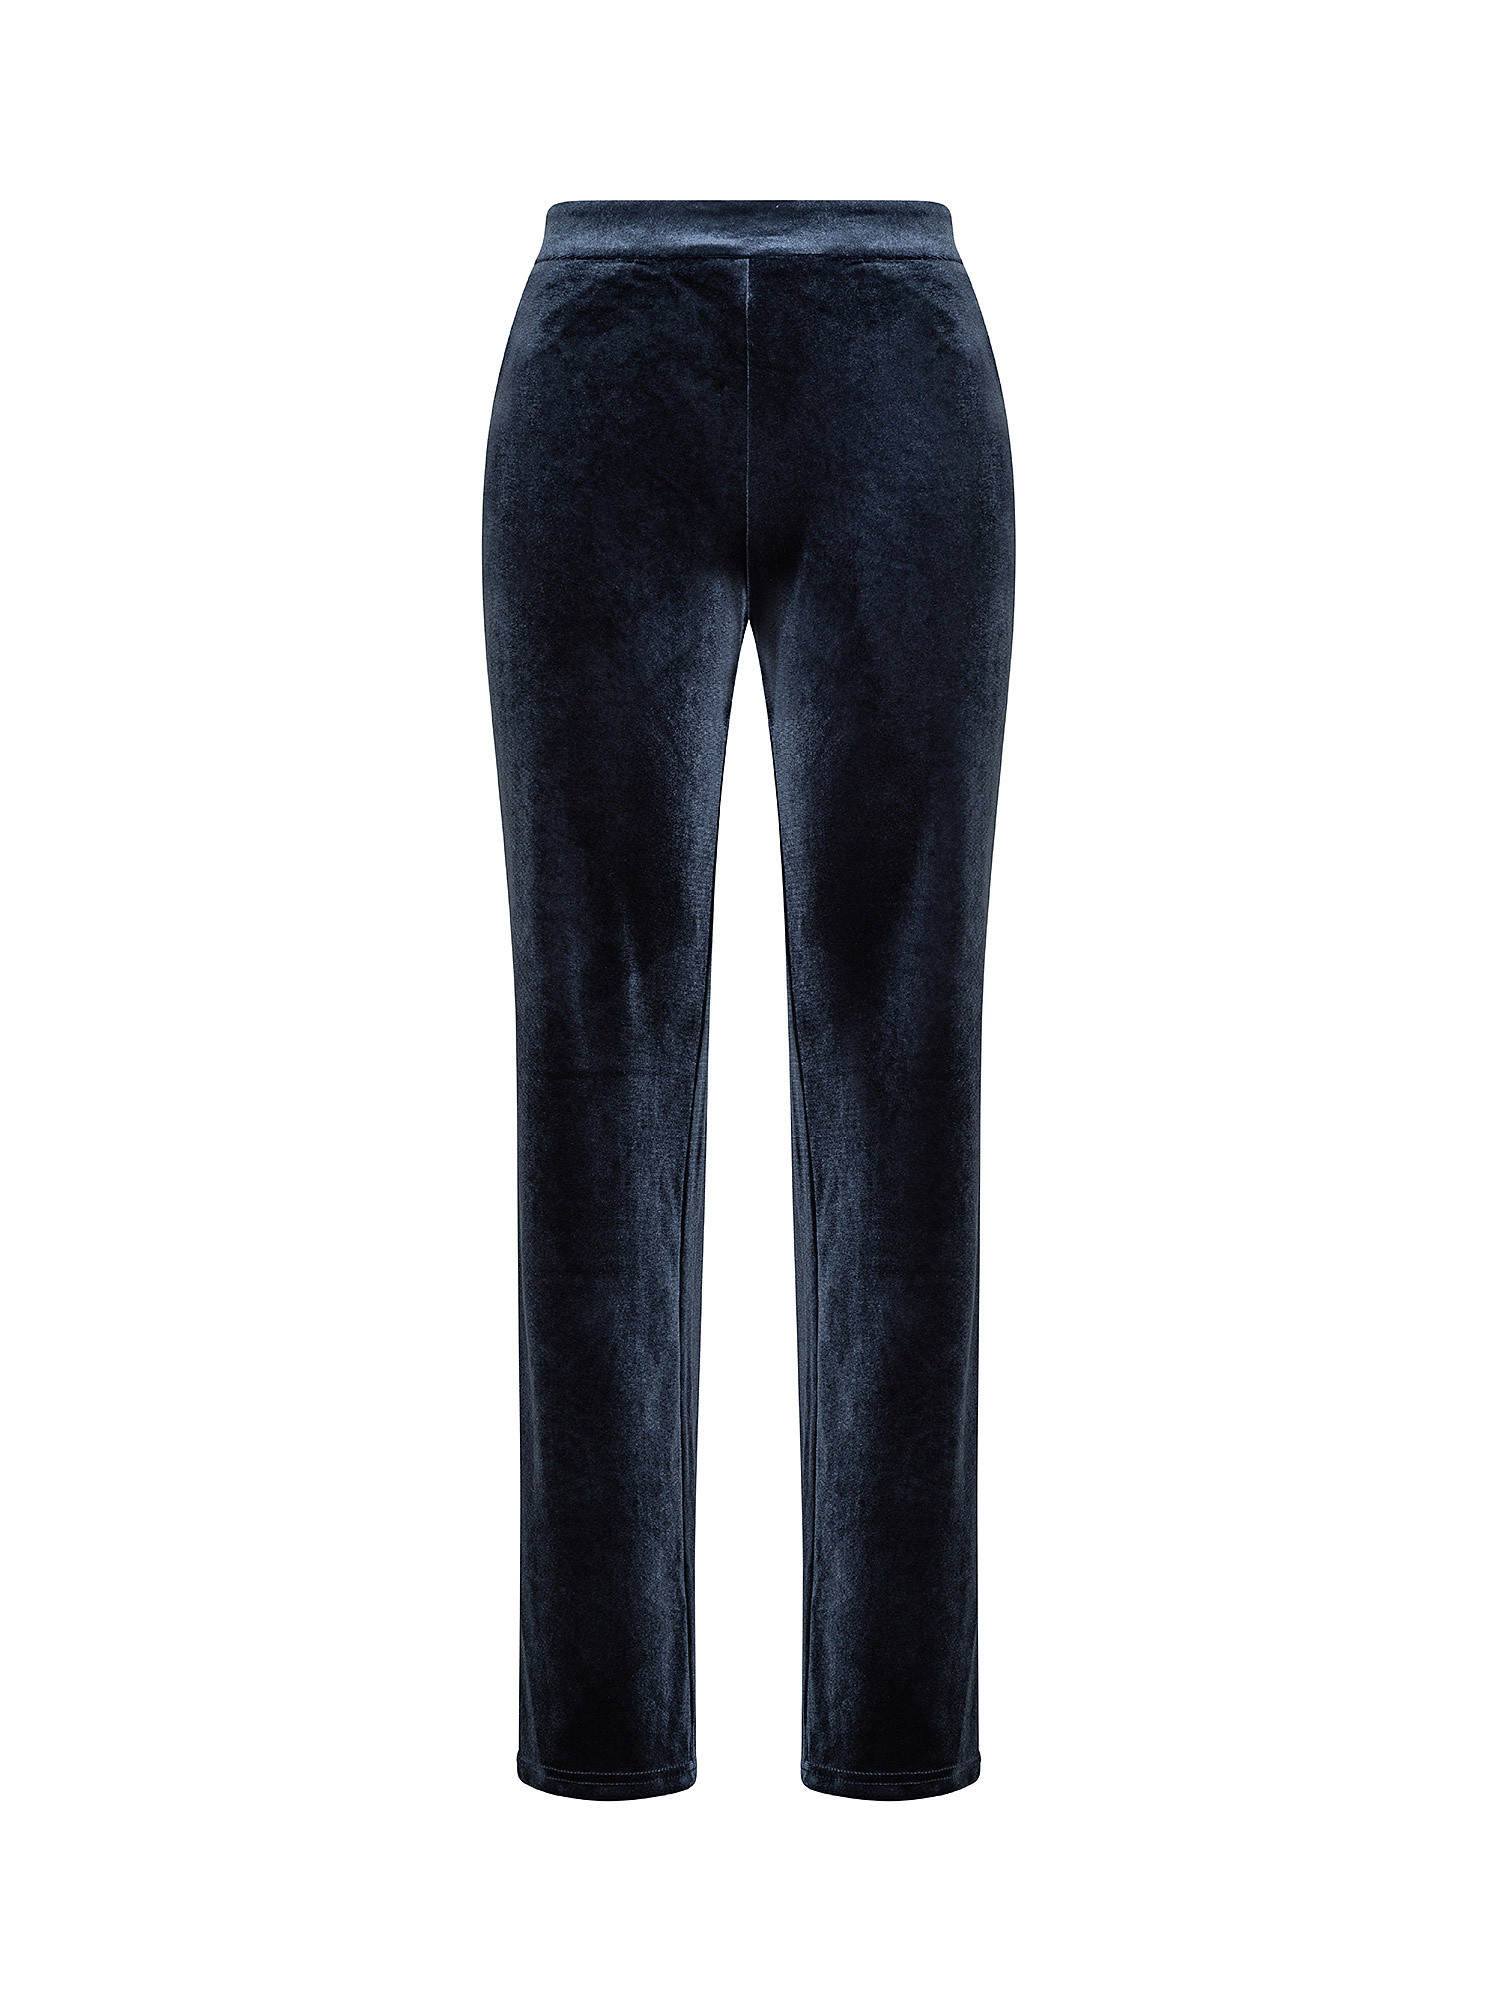 Chenille trousers, Blue, large image number 0